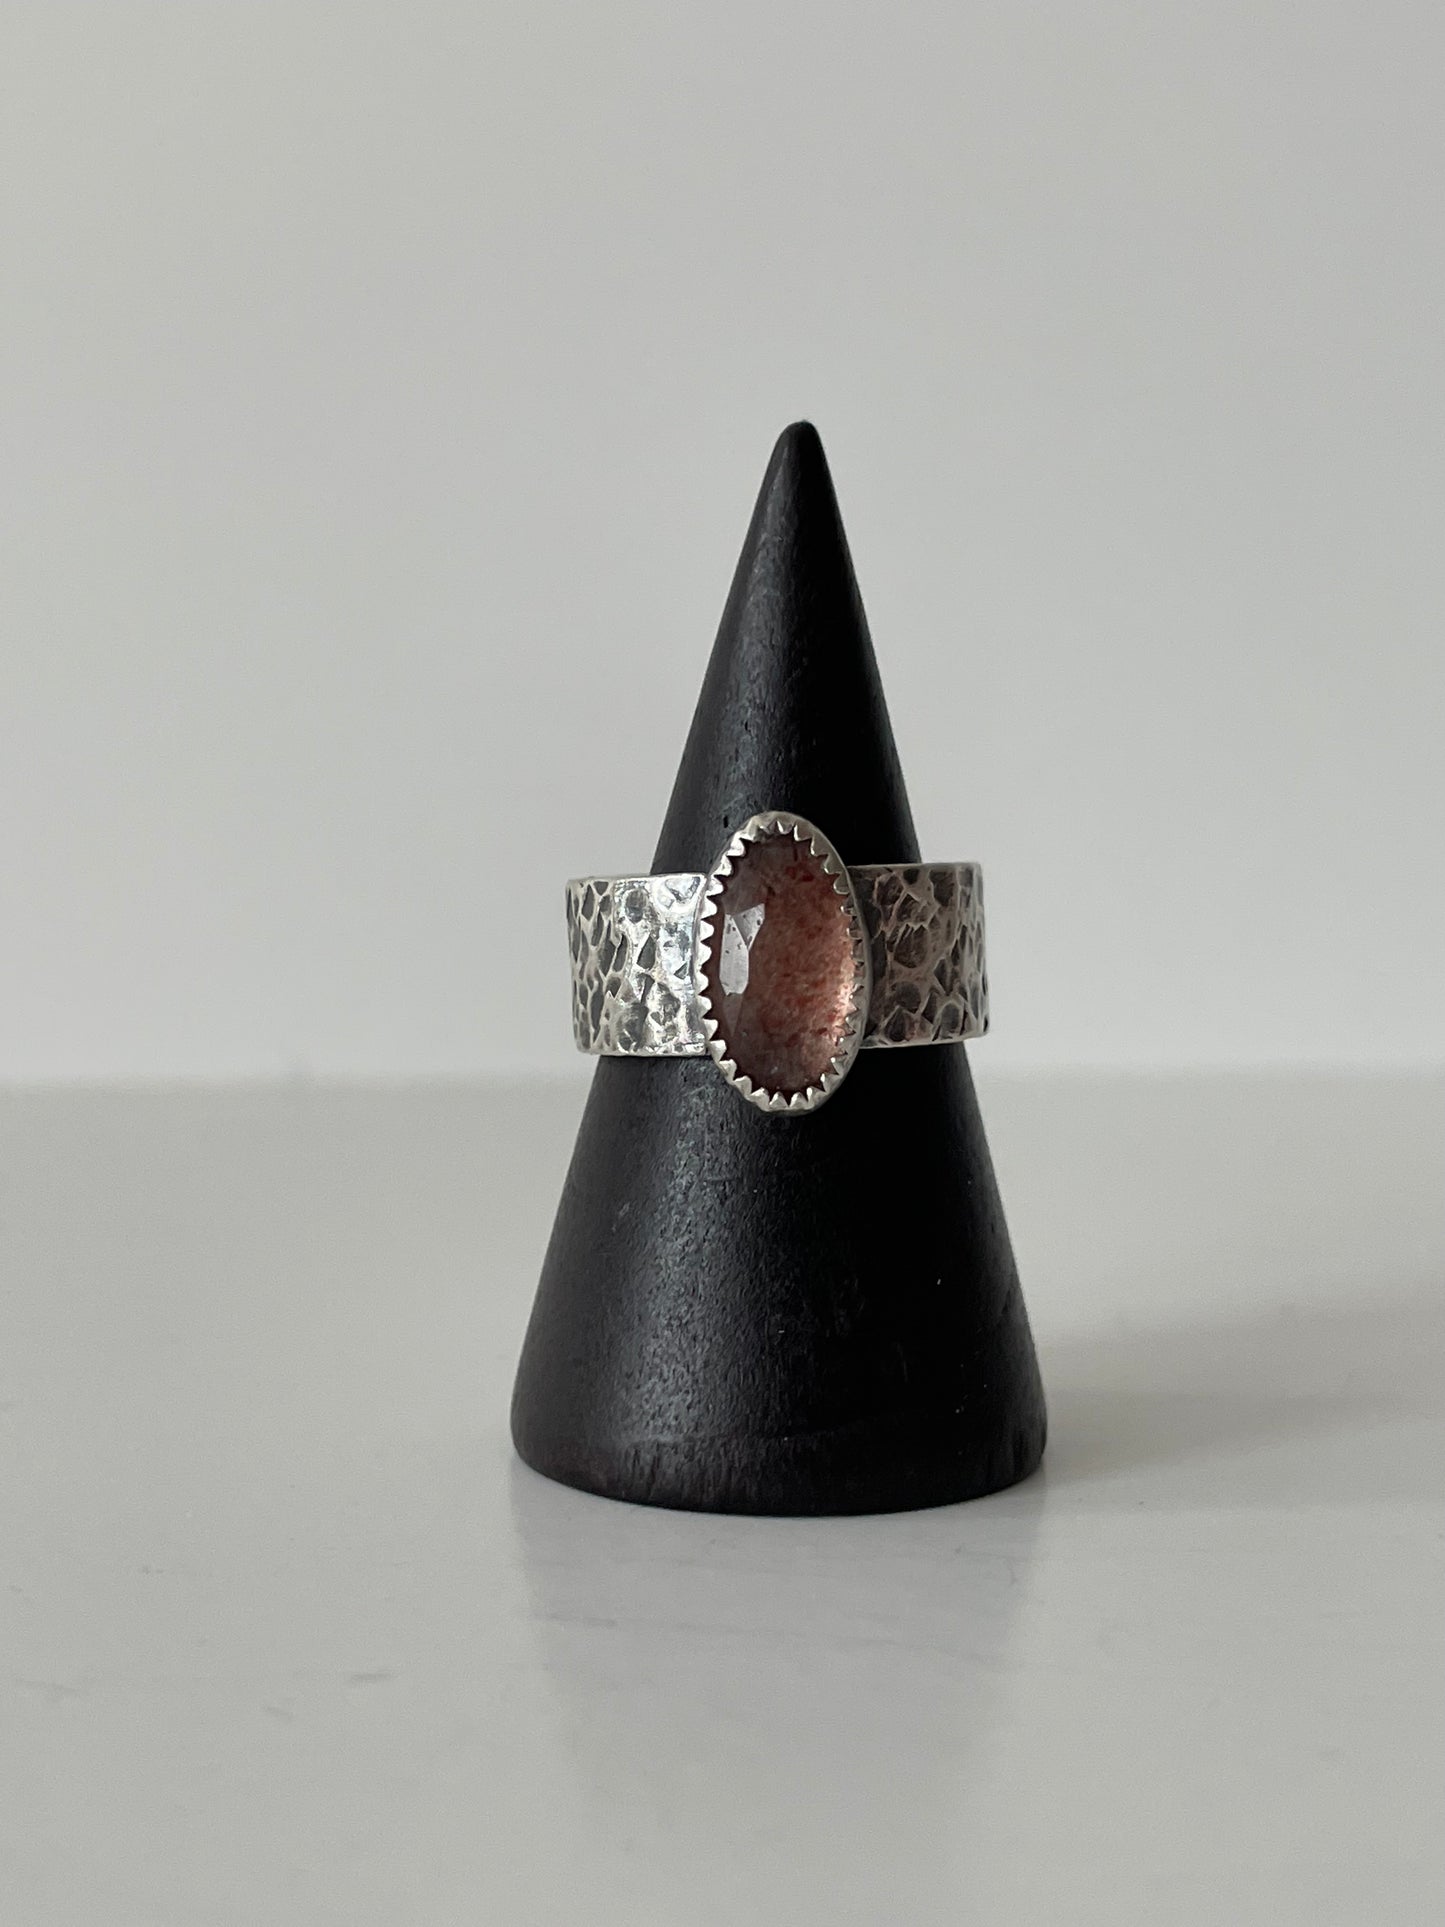 Strawberry Quartz and Sterling Ring - US 5.75